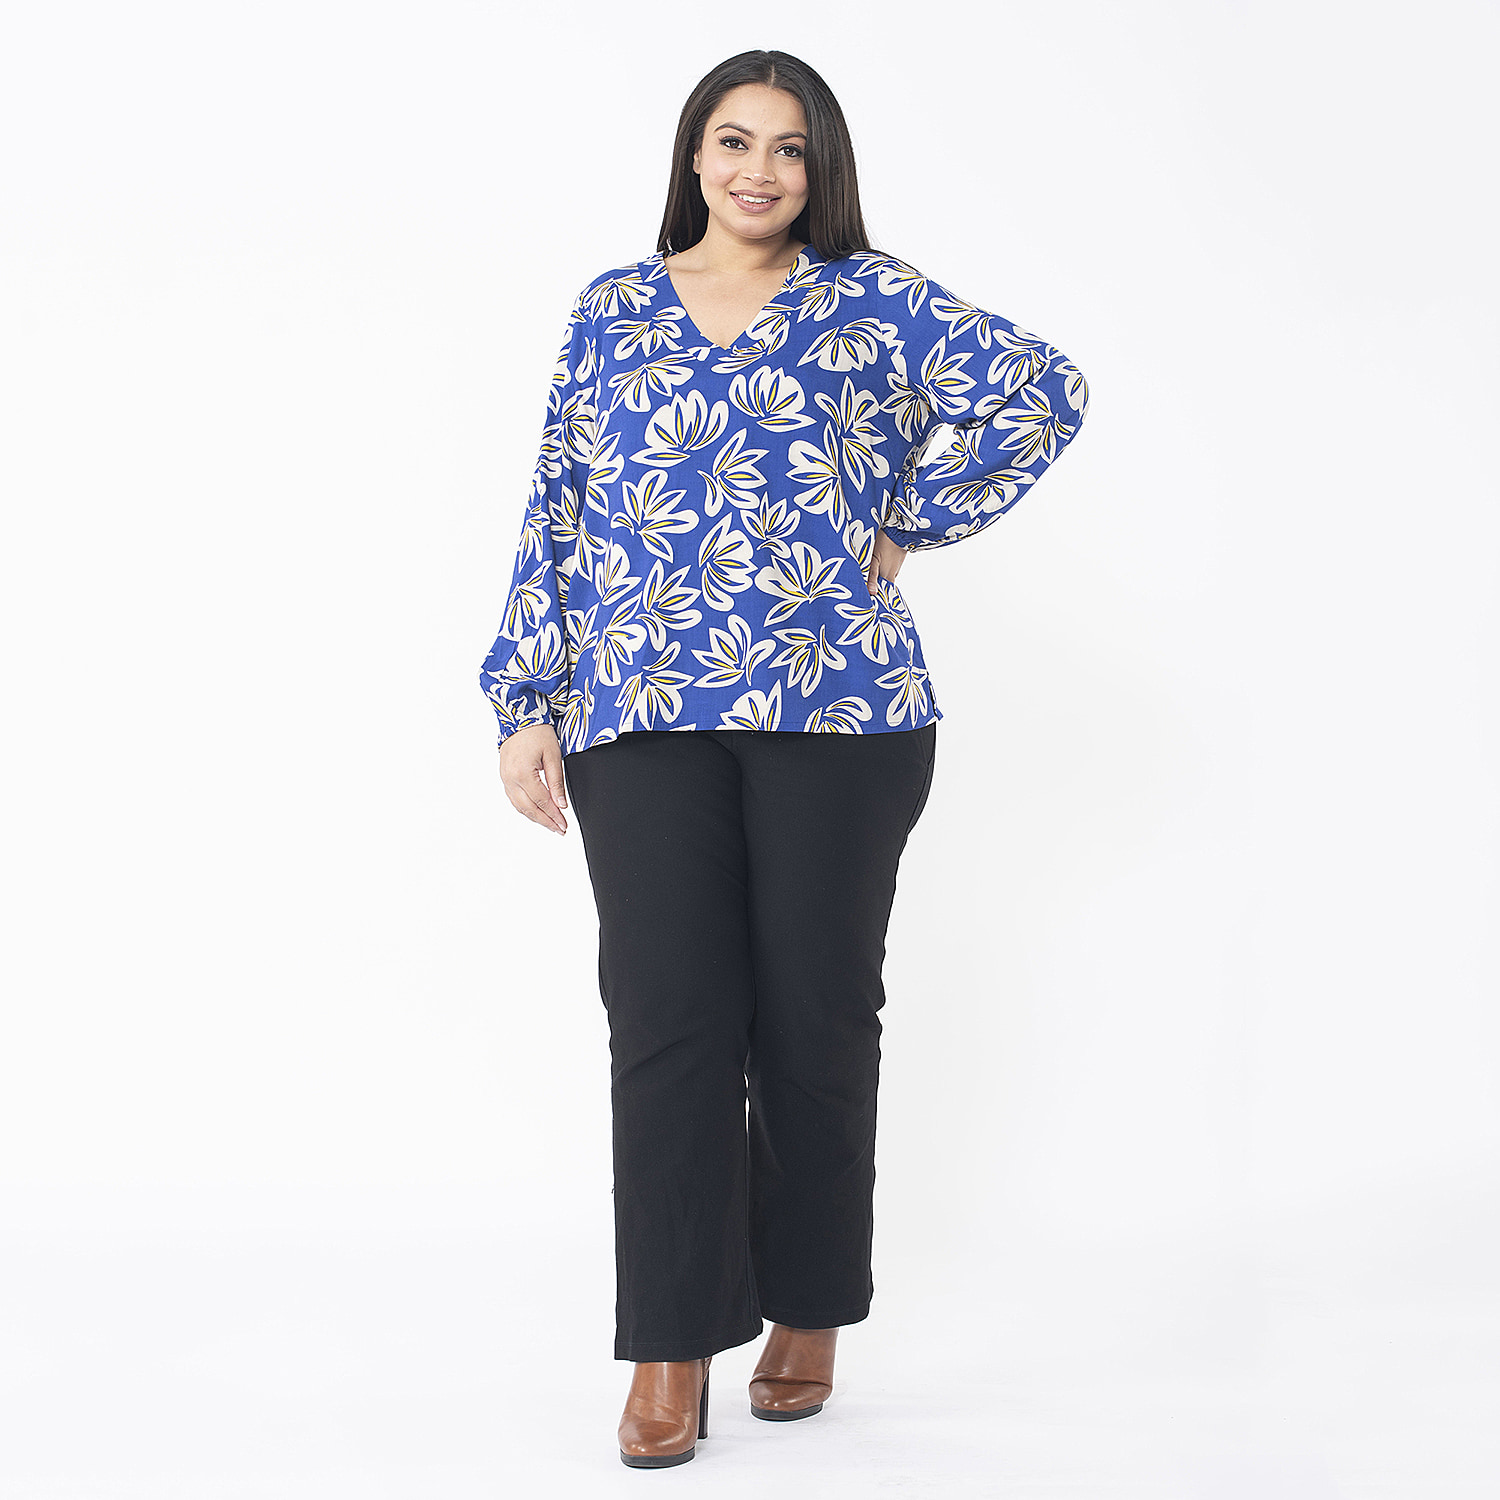 TAMSY 100% Viscose Floral Printed V Neck Full Sleeve Top with Elastic at Cuffs (Size M,12-14) - Navy